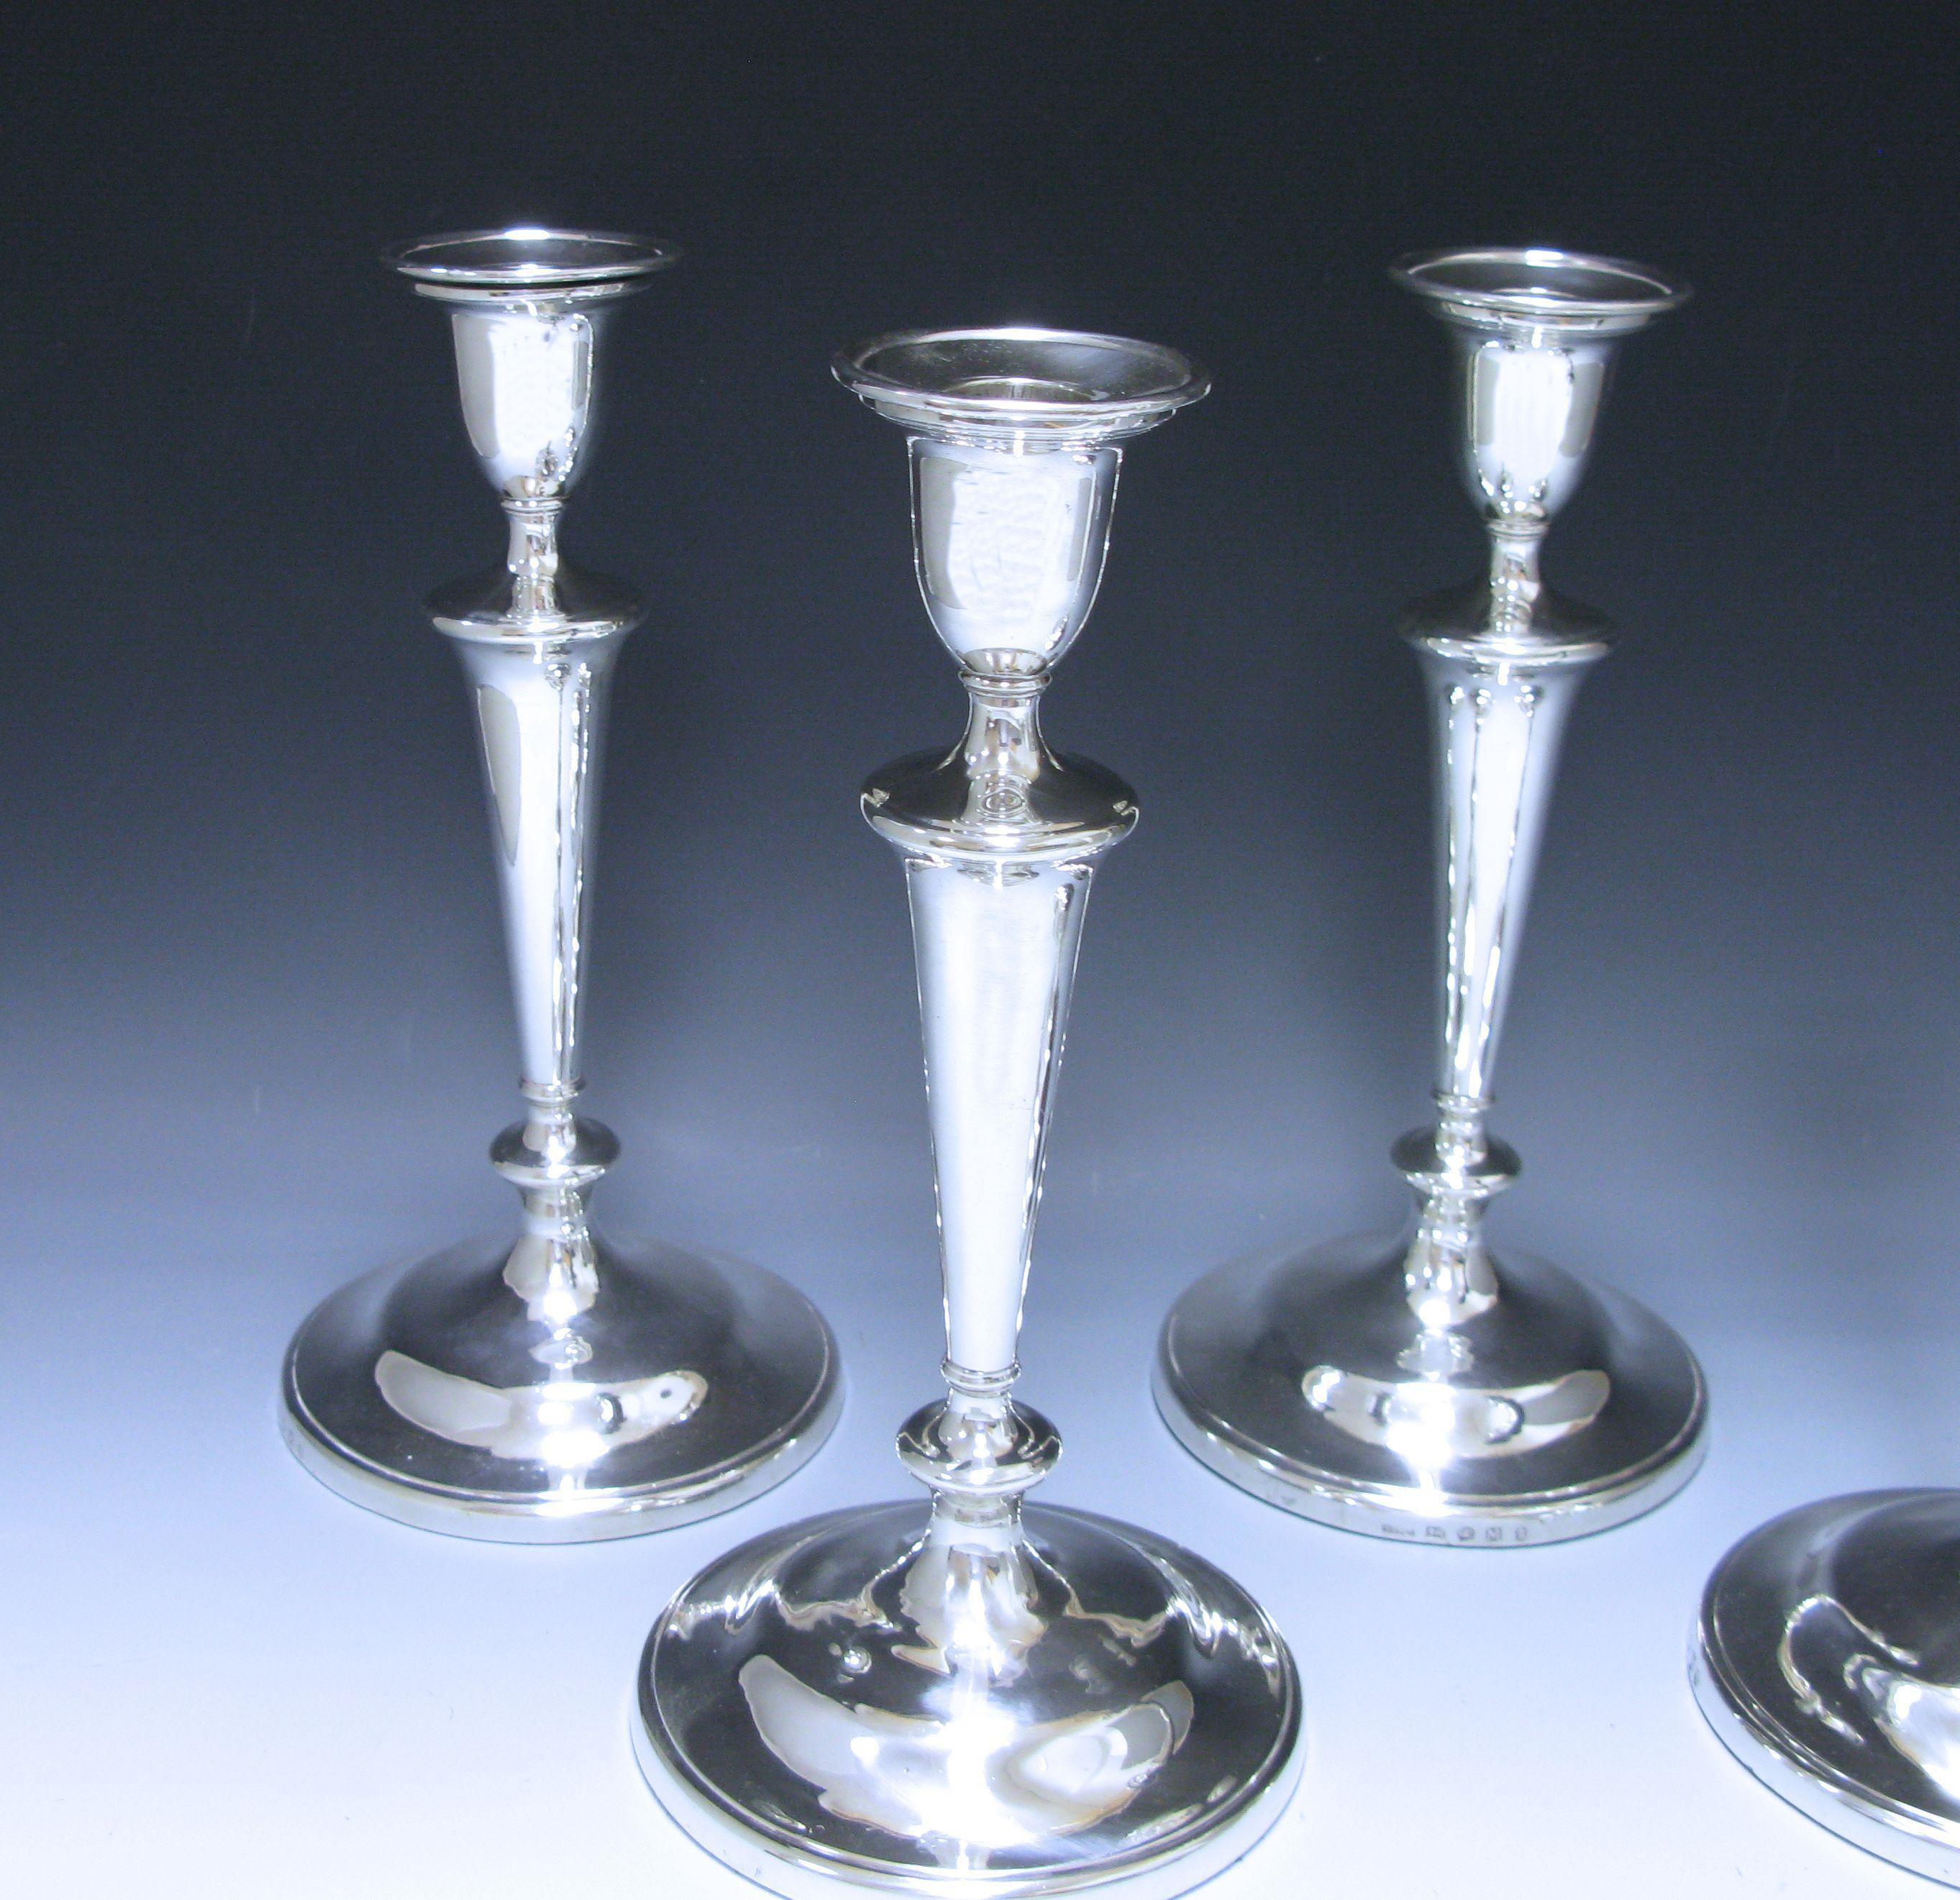 An impressive set of four antique George III sterling silver candlesticks which are plain and unembellished with bell shaped capitals. Each candlestick retains the original hallmarked push fit sconce, with a moulded rim. The columns are V-shaped and